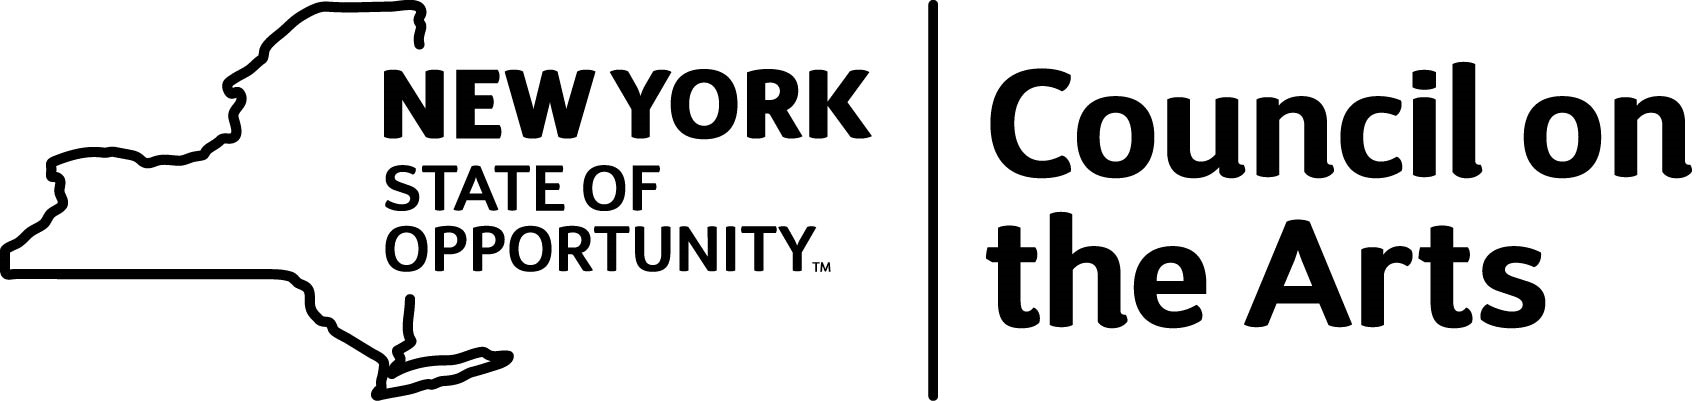 NYC council on the arts logo